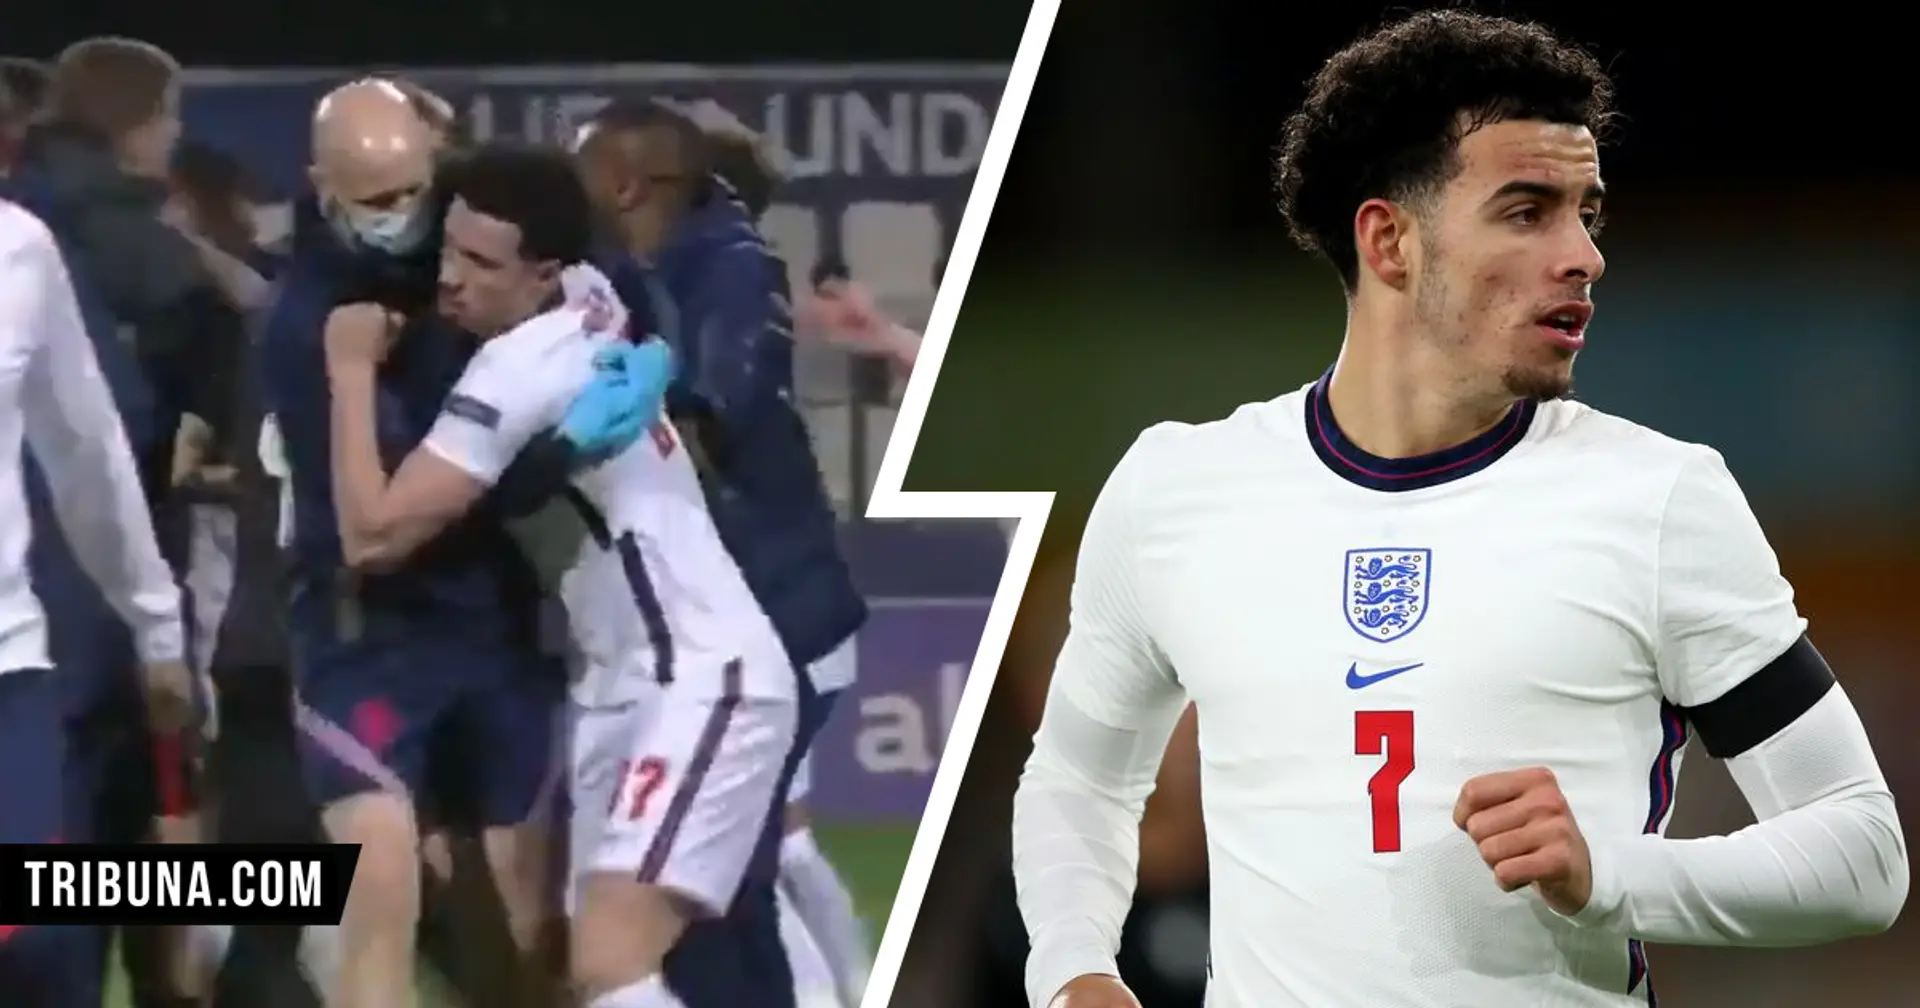 Curtis Jones clashes with Croatian team as England crash out of U21 European Championship (video) 